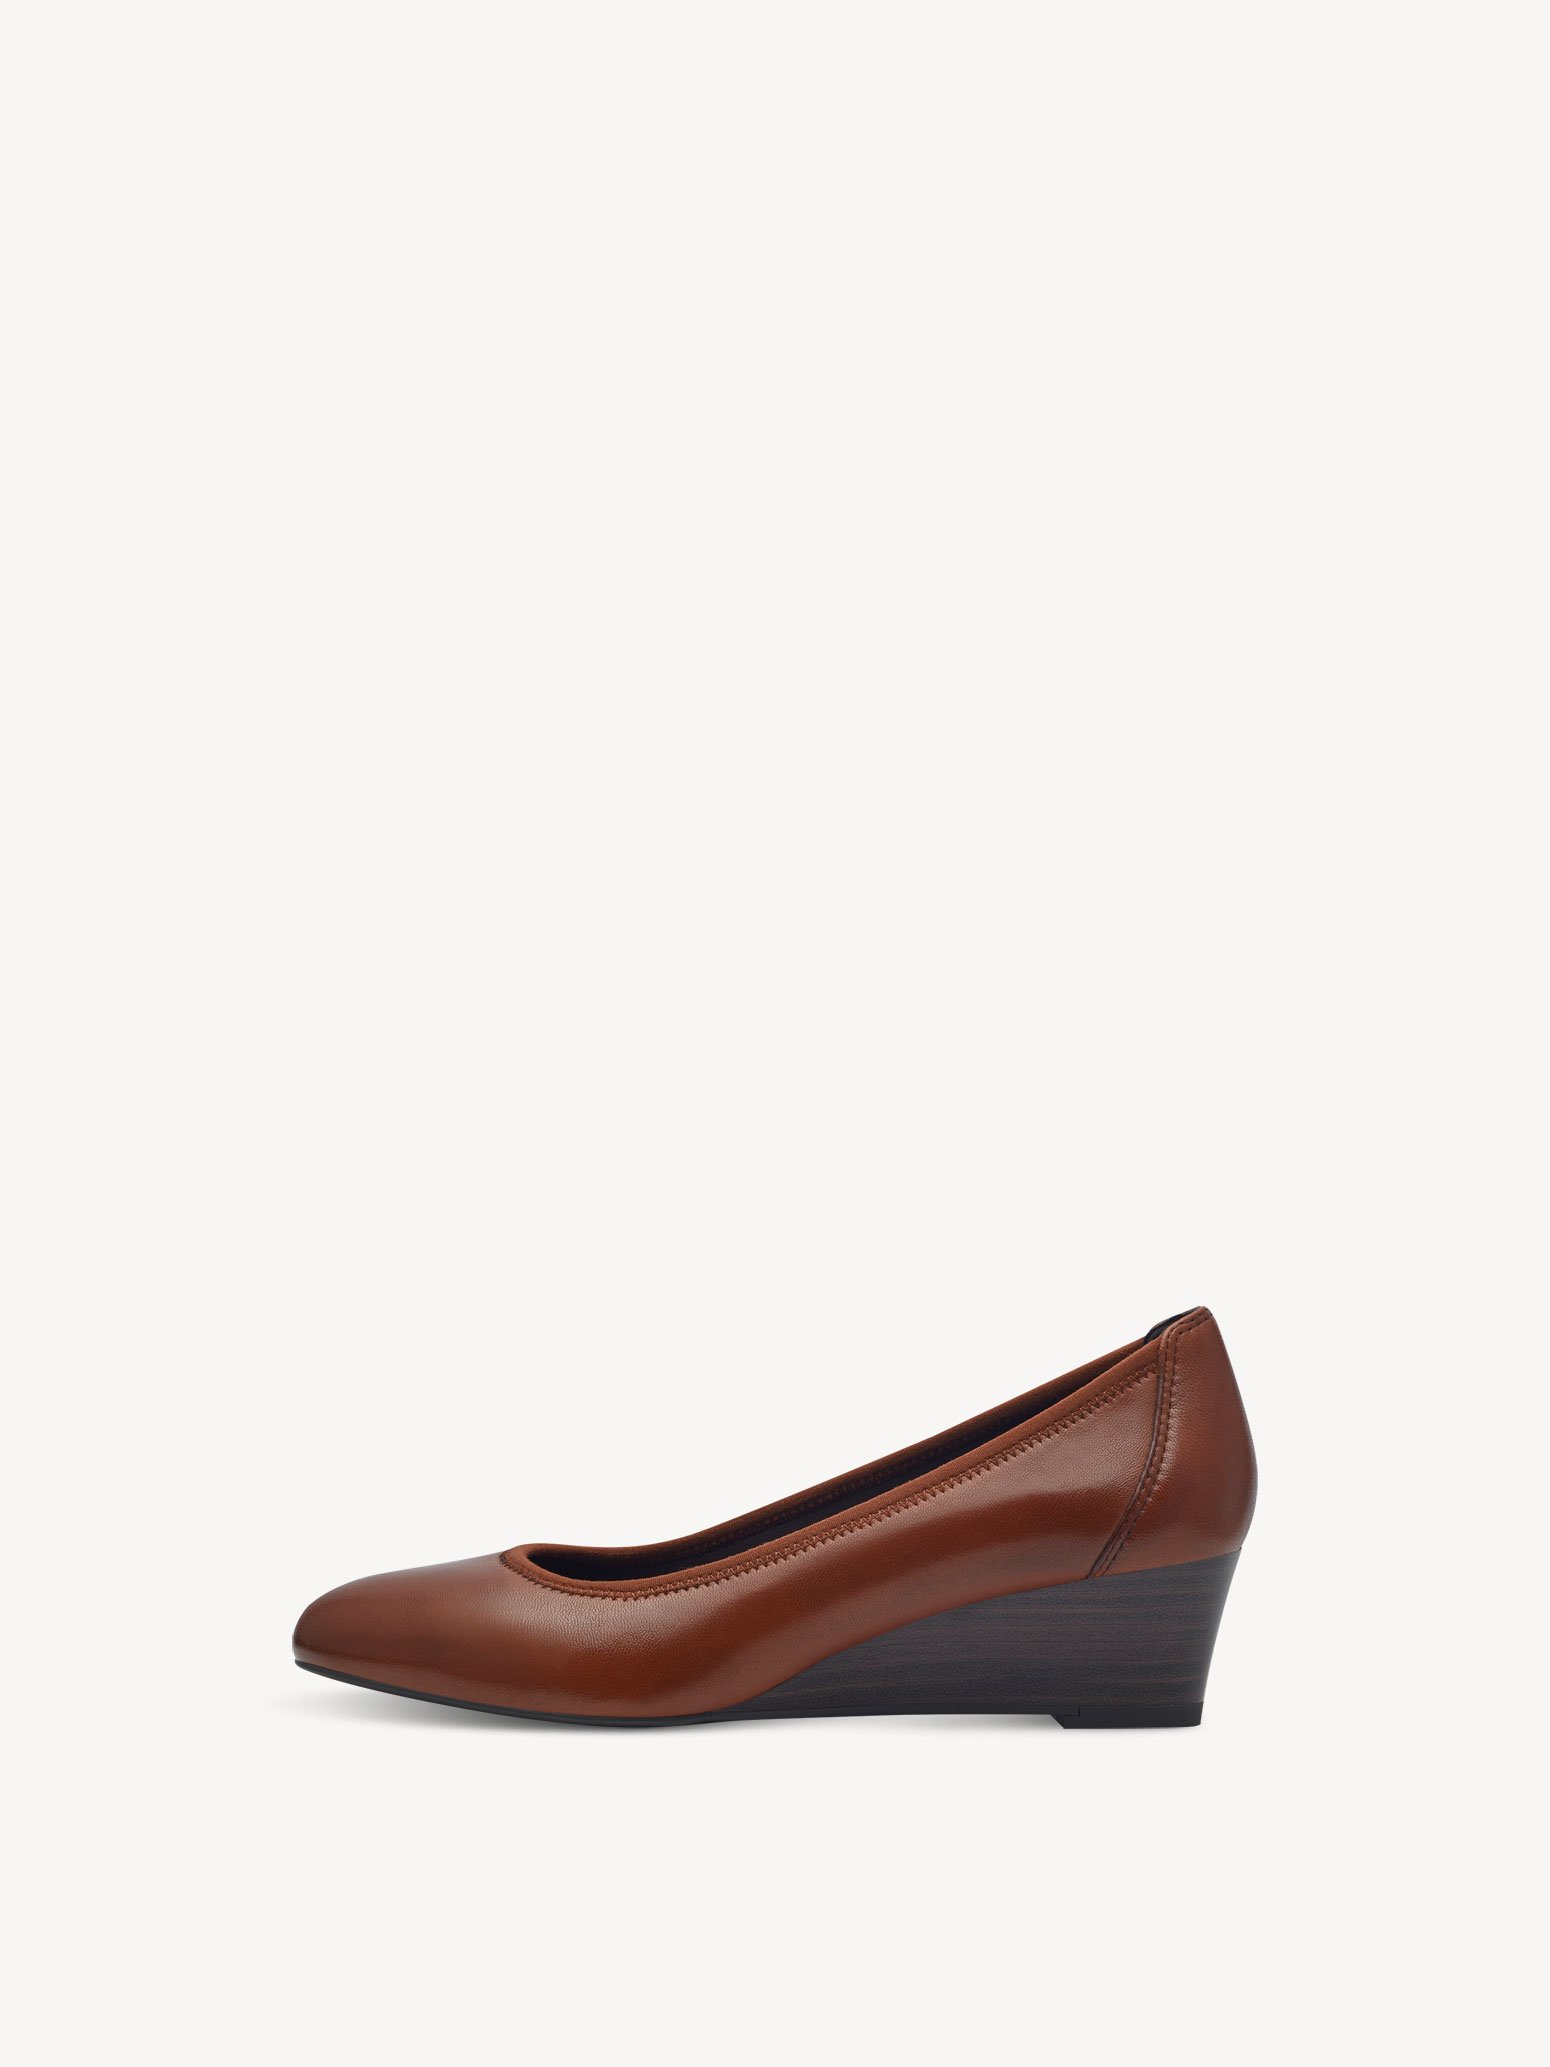 Leather Wedge pumps - brown